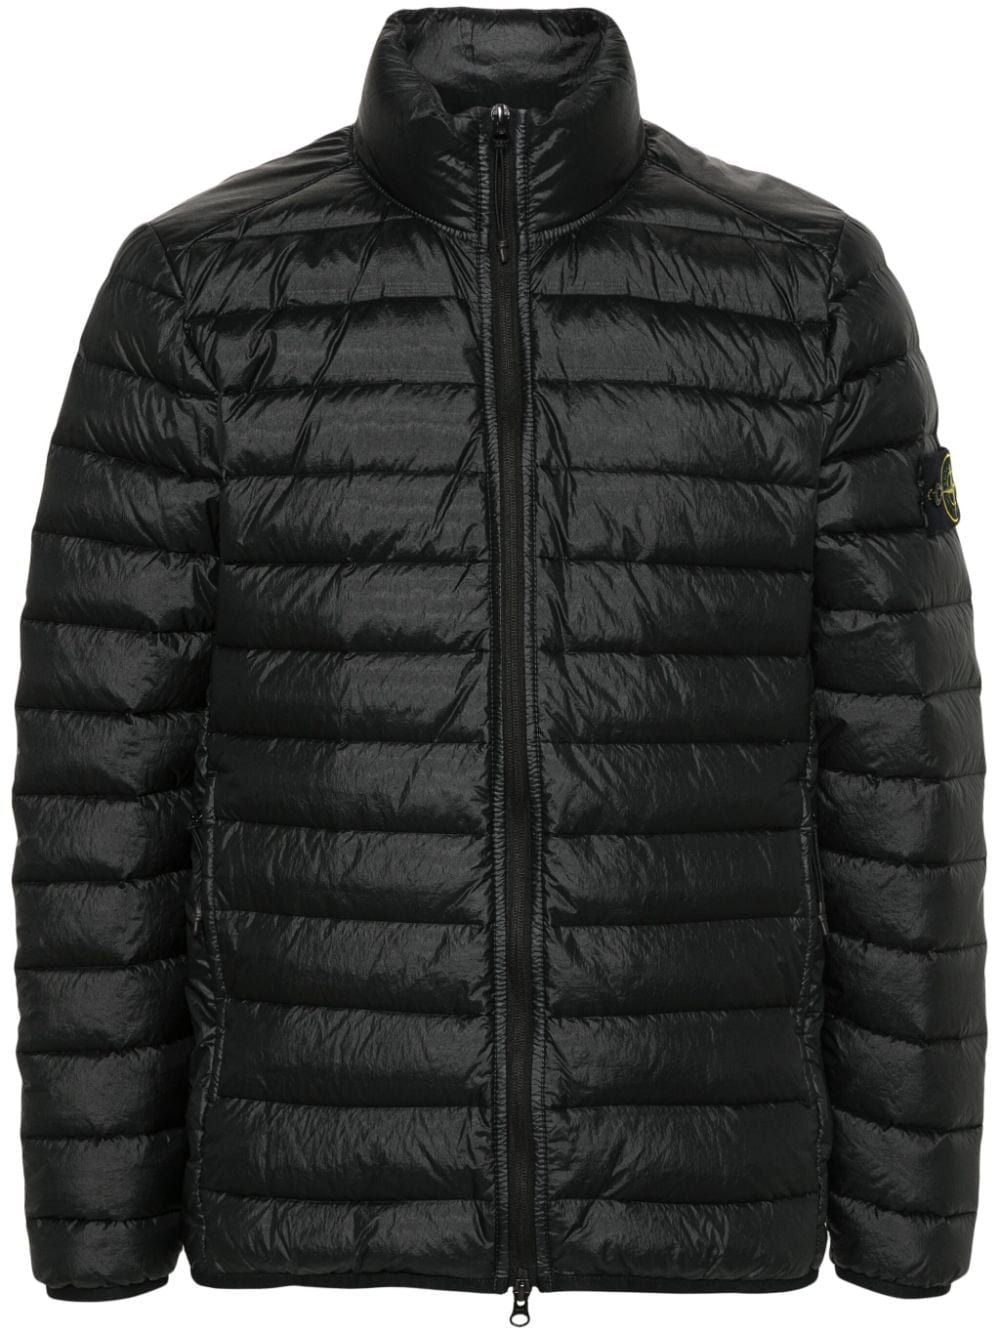 STONE ISLAND Black Lightweight Puffer Jacket for Men - SS24 Collection